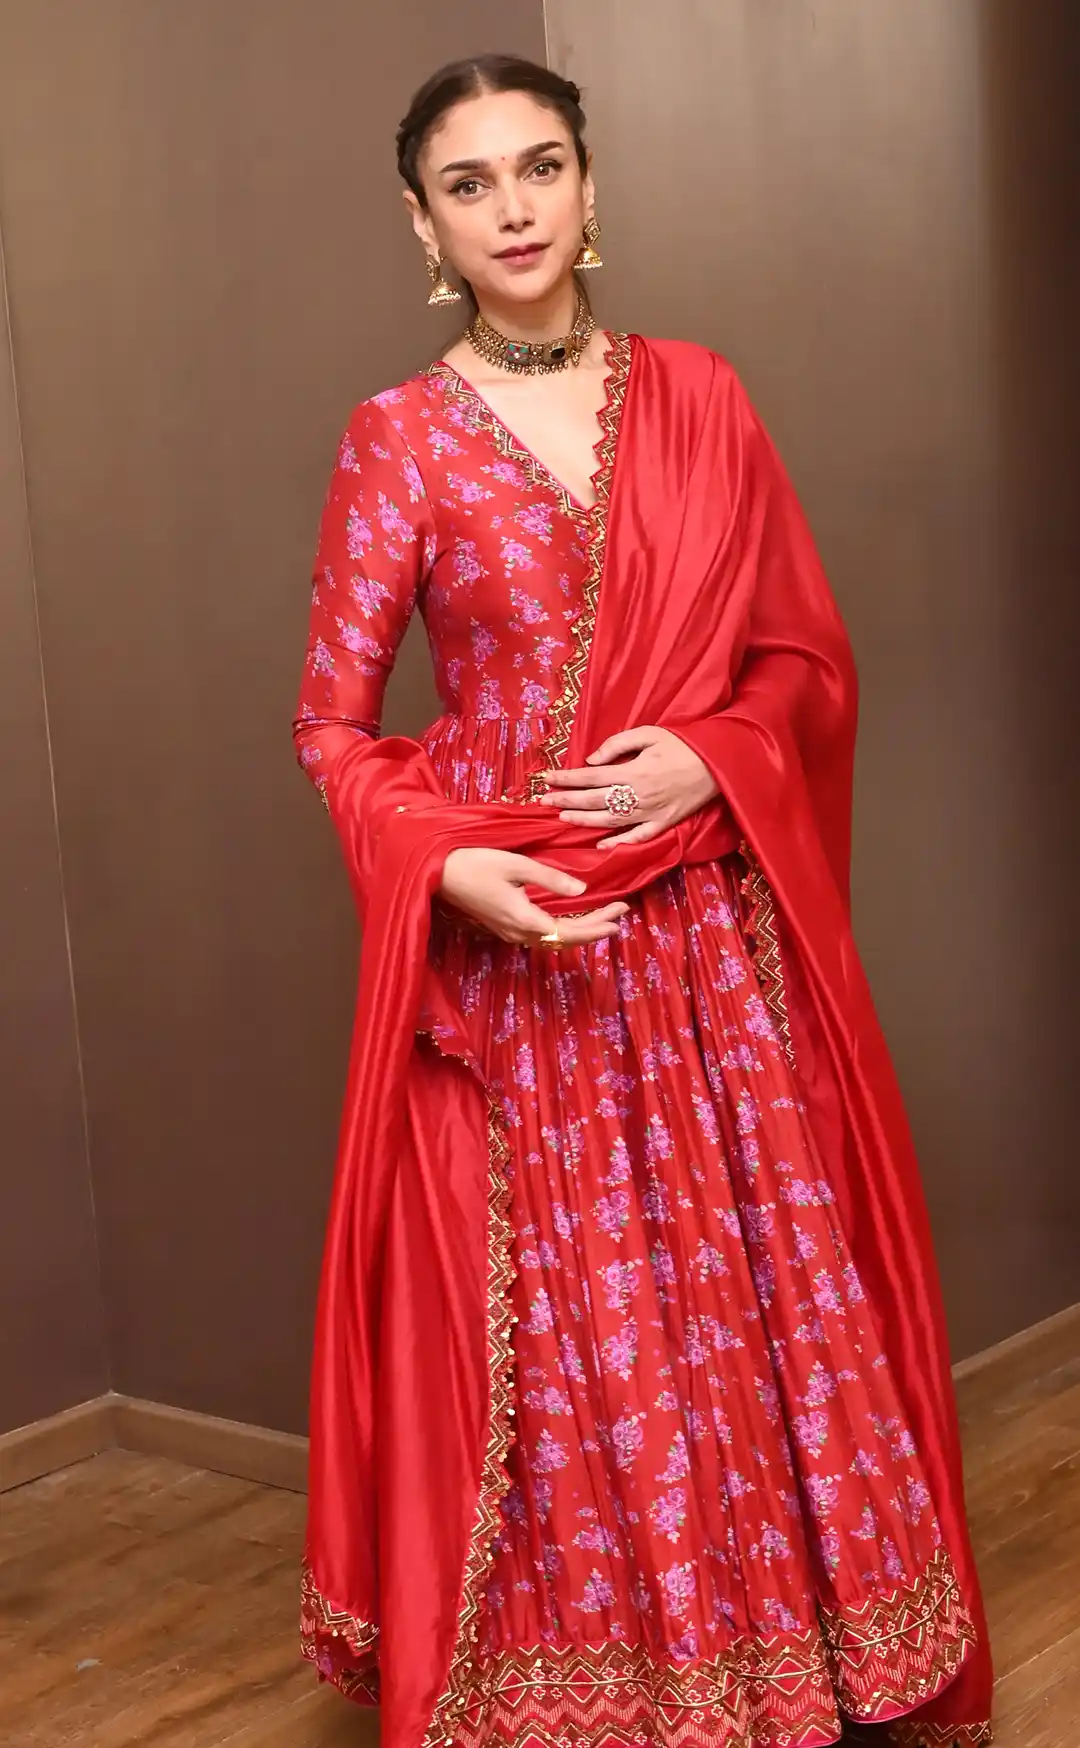 Aditi Rao Hydari Sizzles In Red Dress For Taj Divided By Blood Promotions